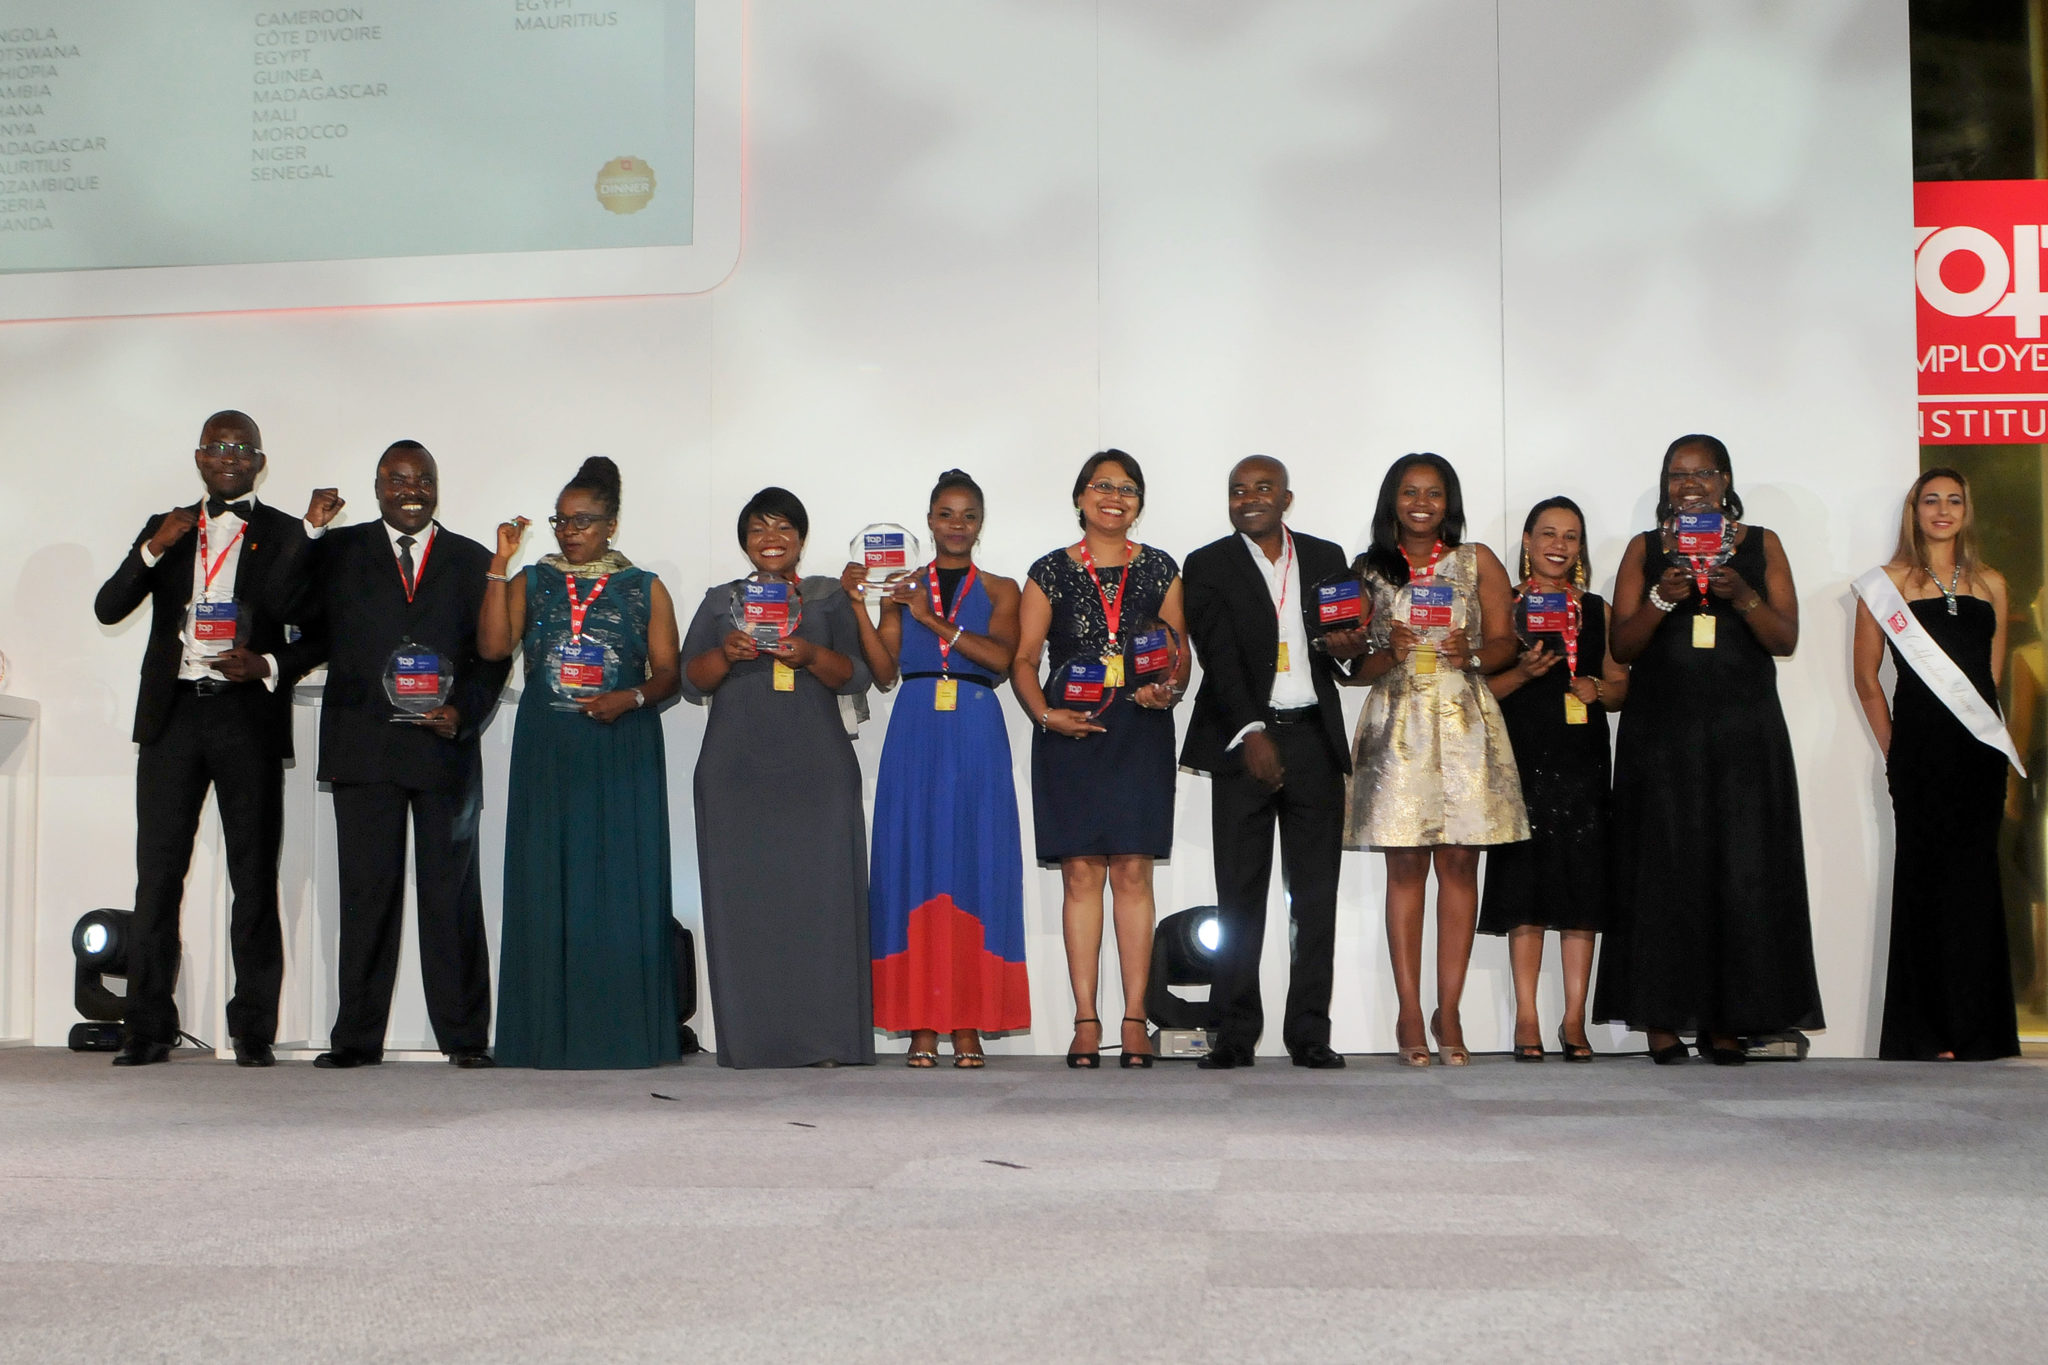 DHL Express Sub Saharan Africa Human Resources Representatives receiving their Top Employer 2017 certification. DHL Express received Top Employer 201 certification in 12 African countries. They were also certified as a Top Employer for Africa 2017